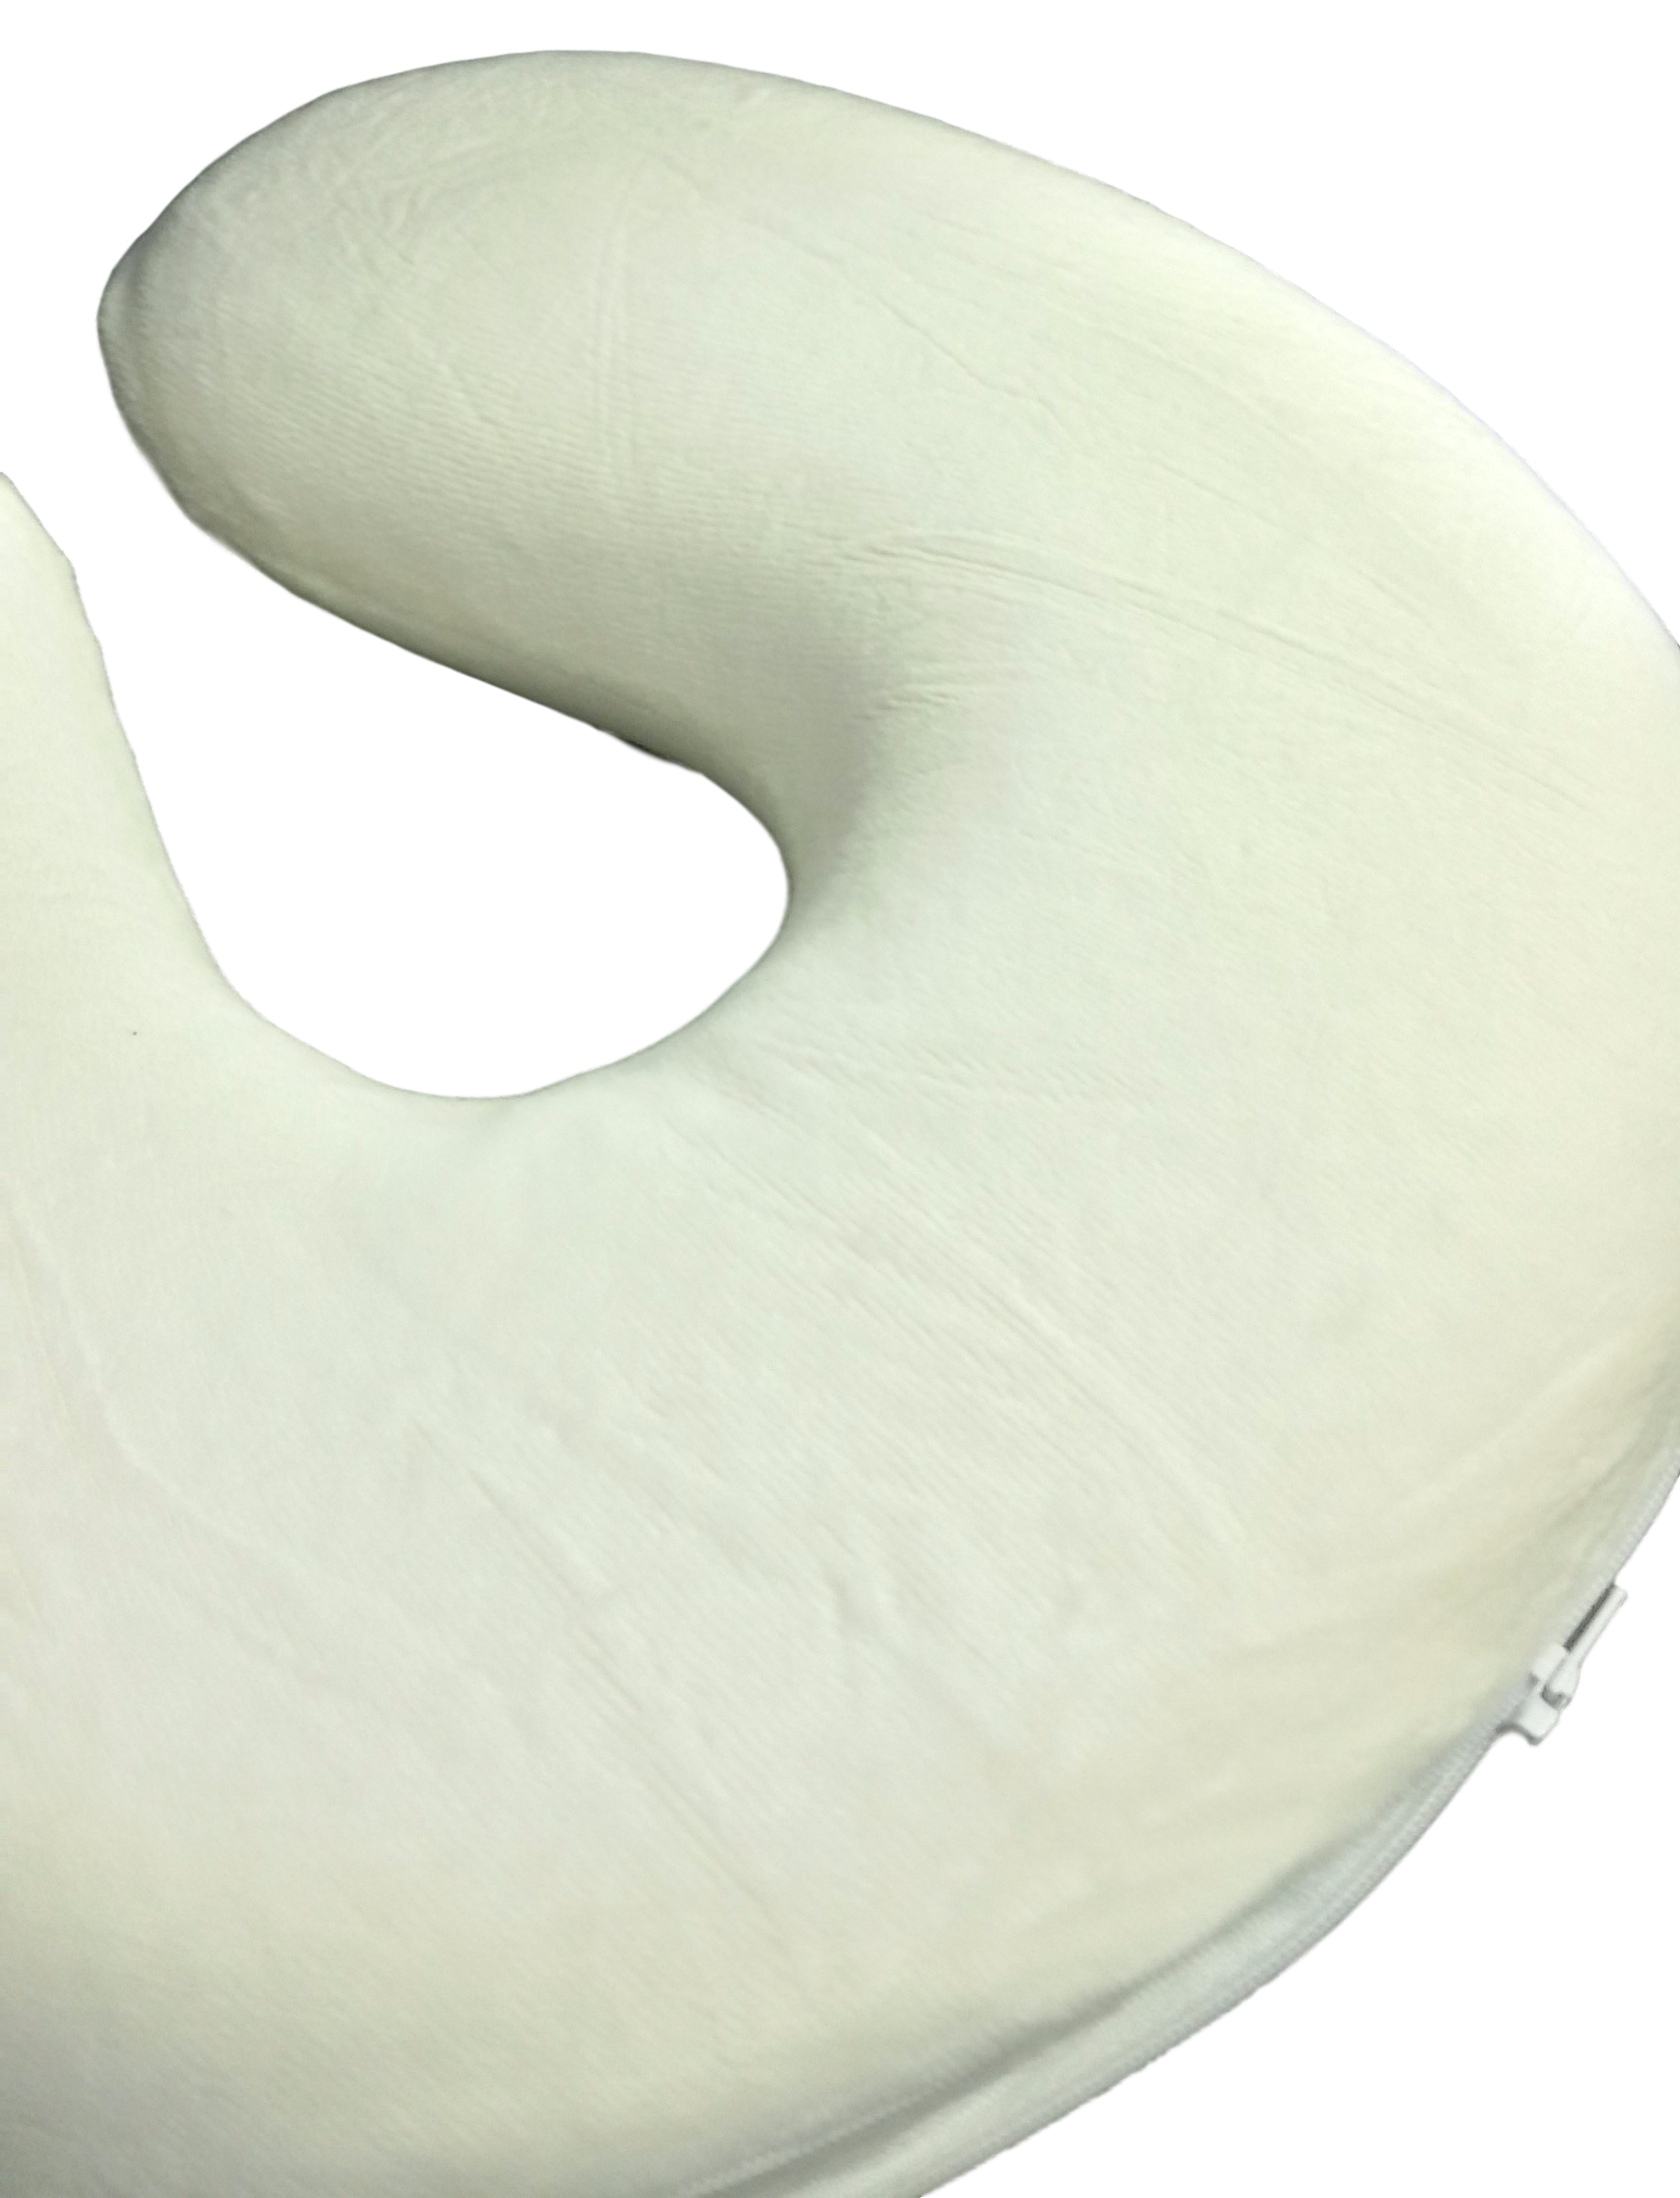 ViscoLogic Memory Foam Neck Pillow Travel Neck Support with White Zipper Cover (Set of 2)